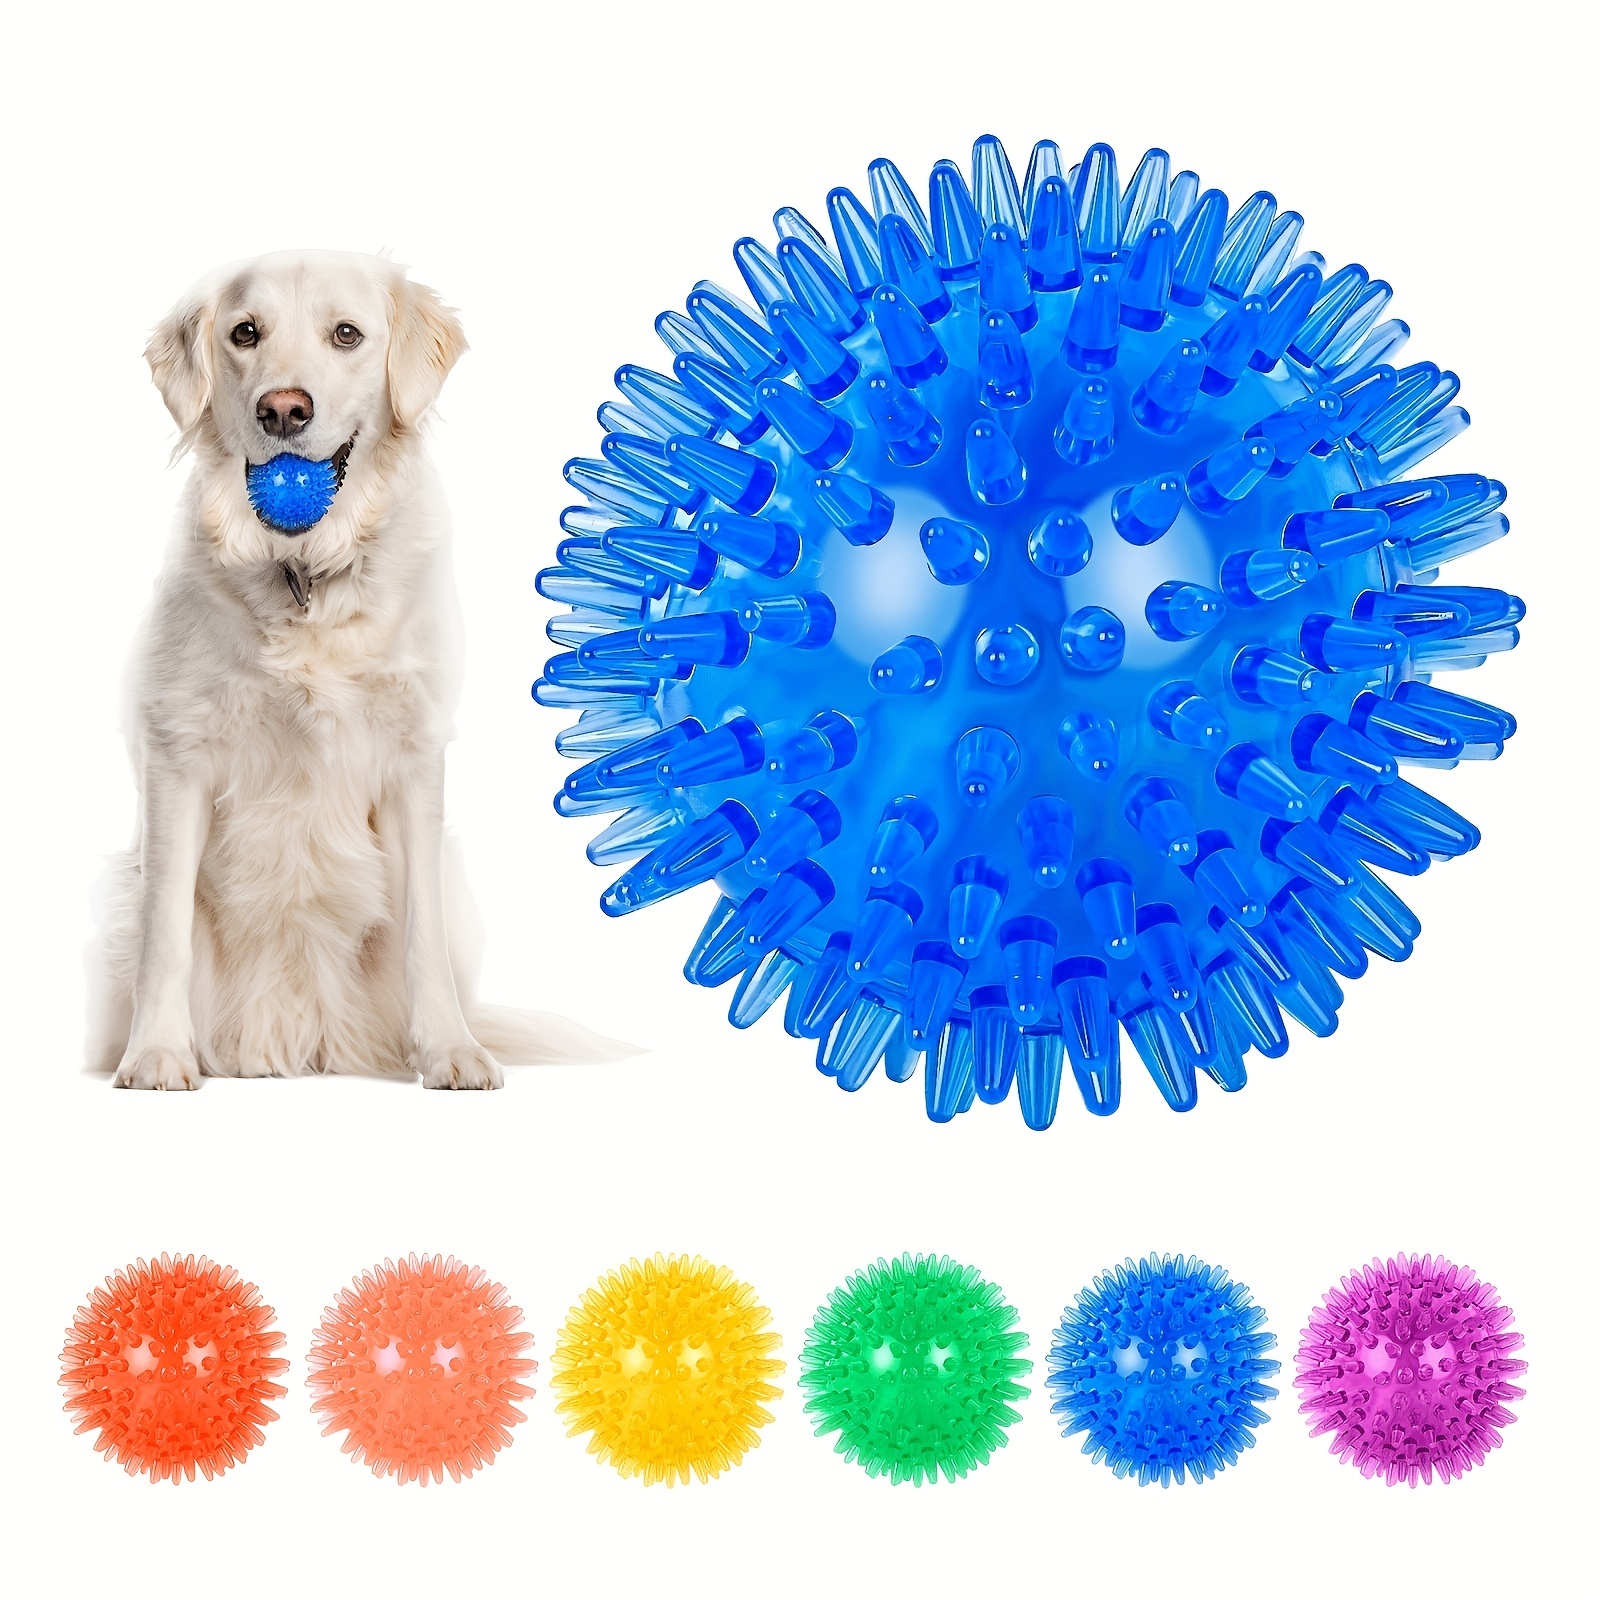 

3pcs Durable Dog Ball Toys For Grinding Teeth And Interactive Play With Sound Effects, Assorted Color